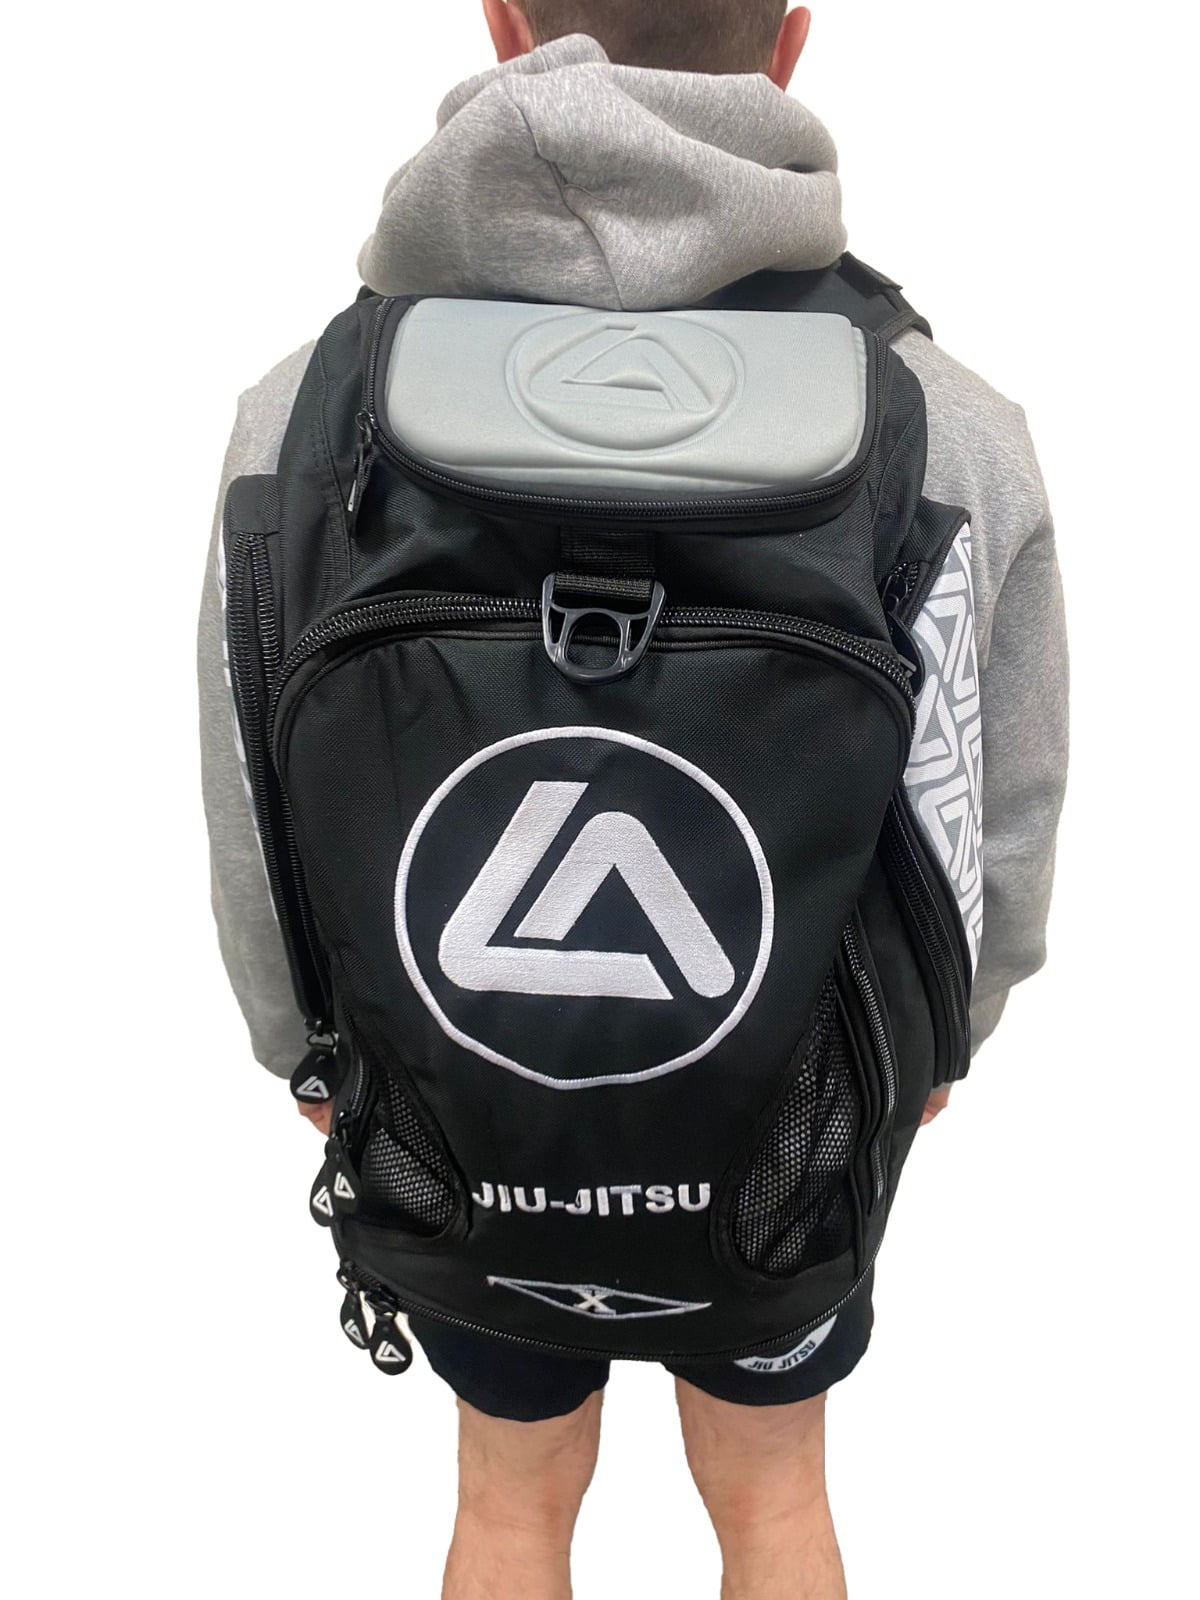 the rear view of a roger gracie branded backpack